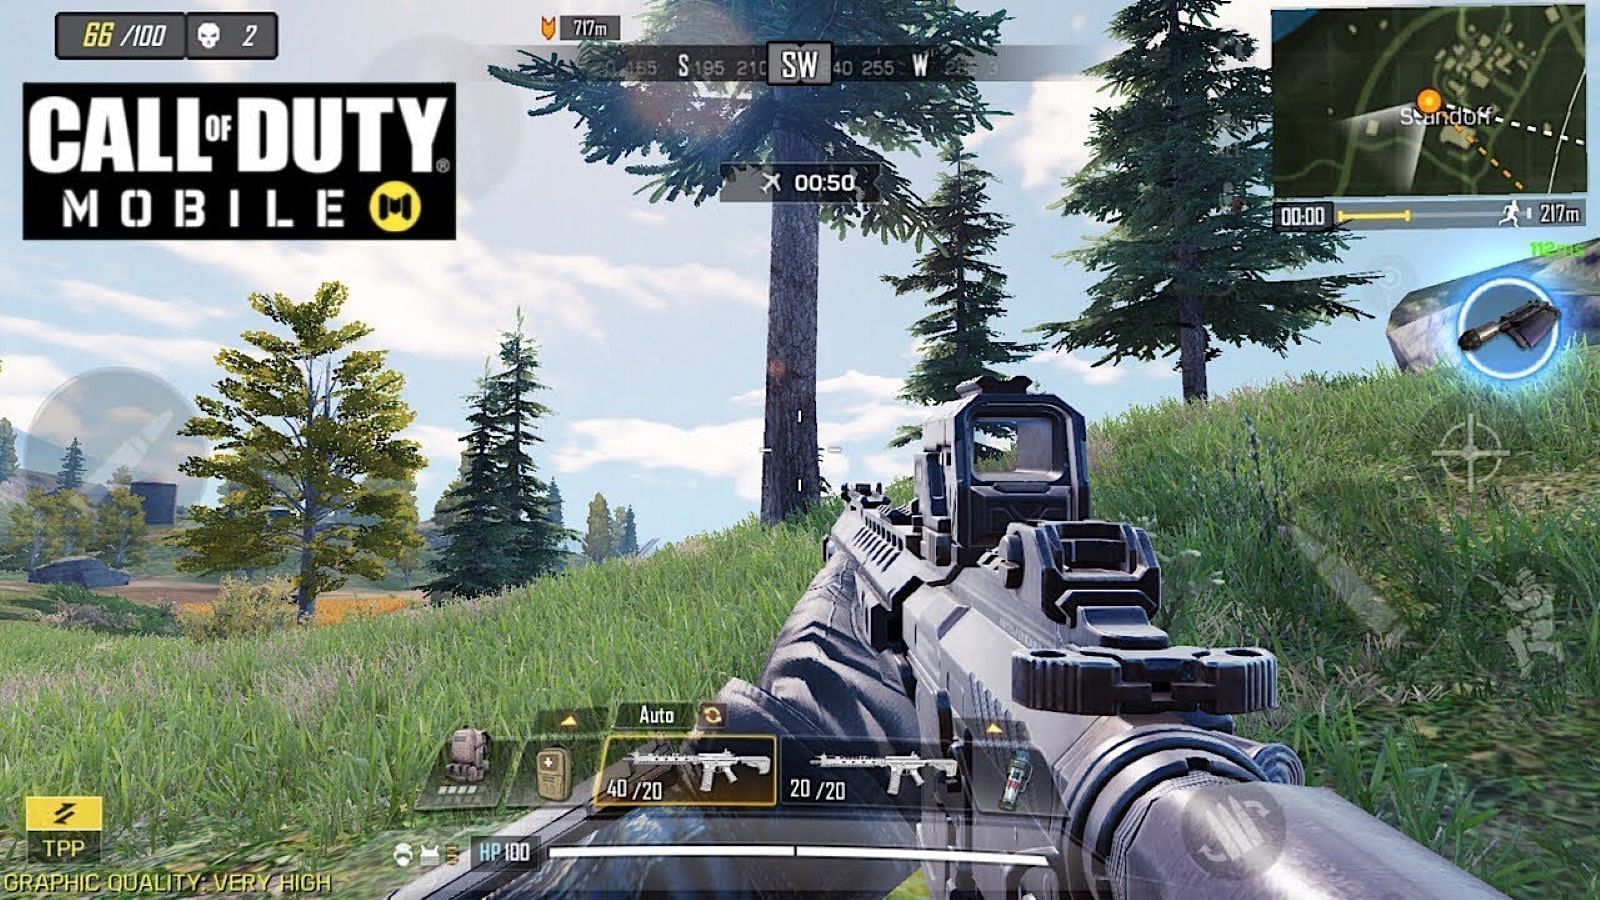 5 best Call of duty Mobile tips to help you get more headshots (Image via YouTube/Yanrique)